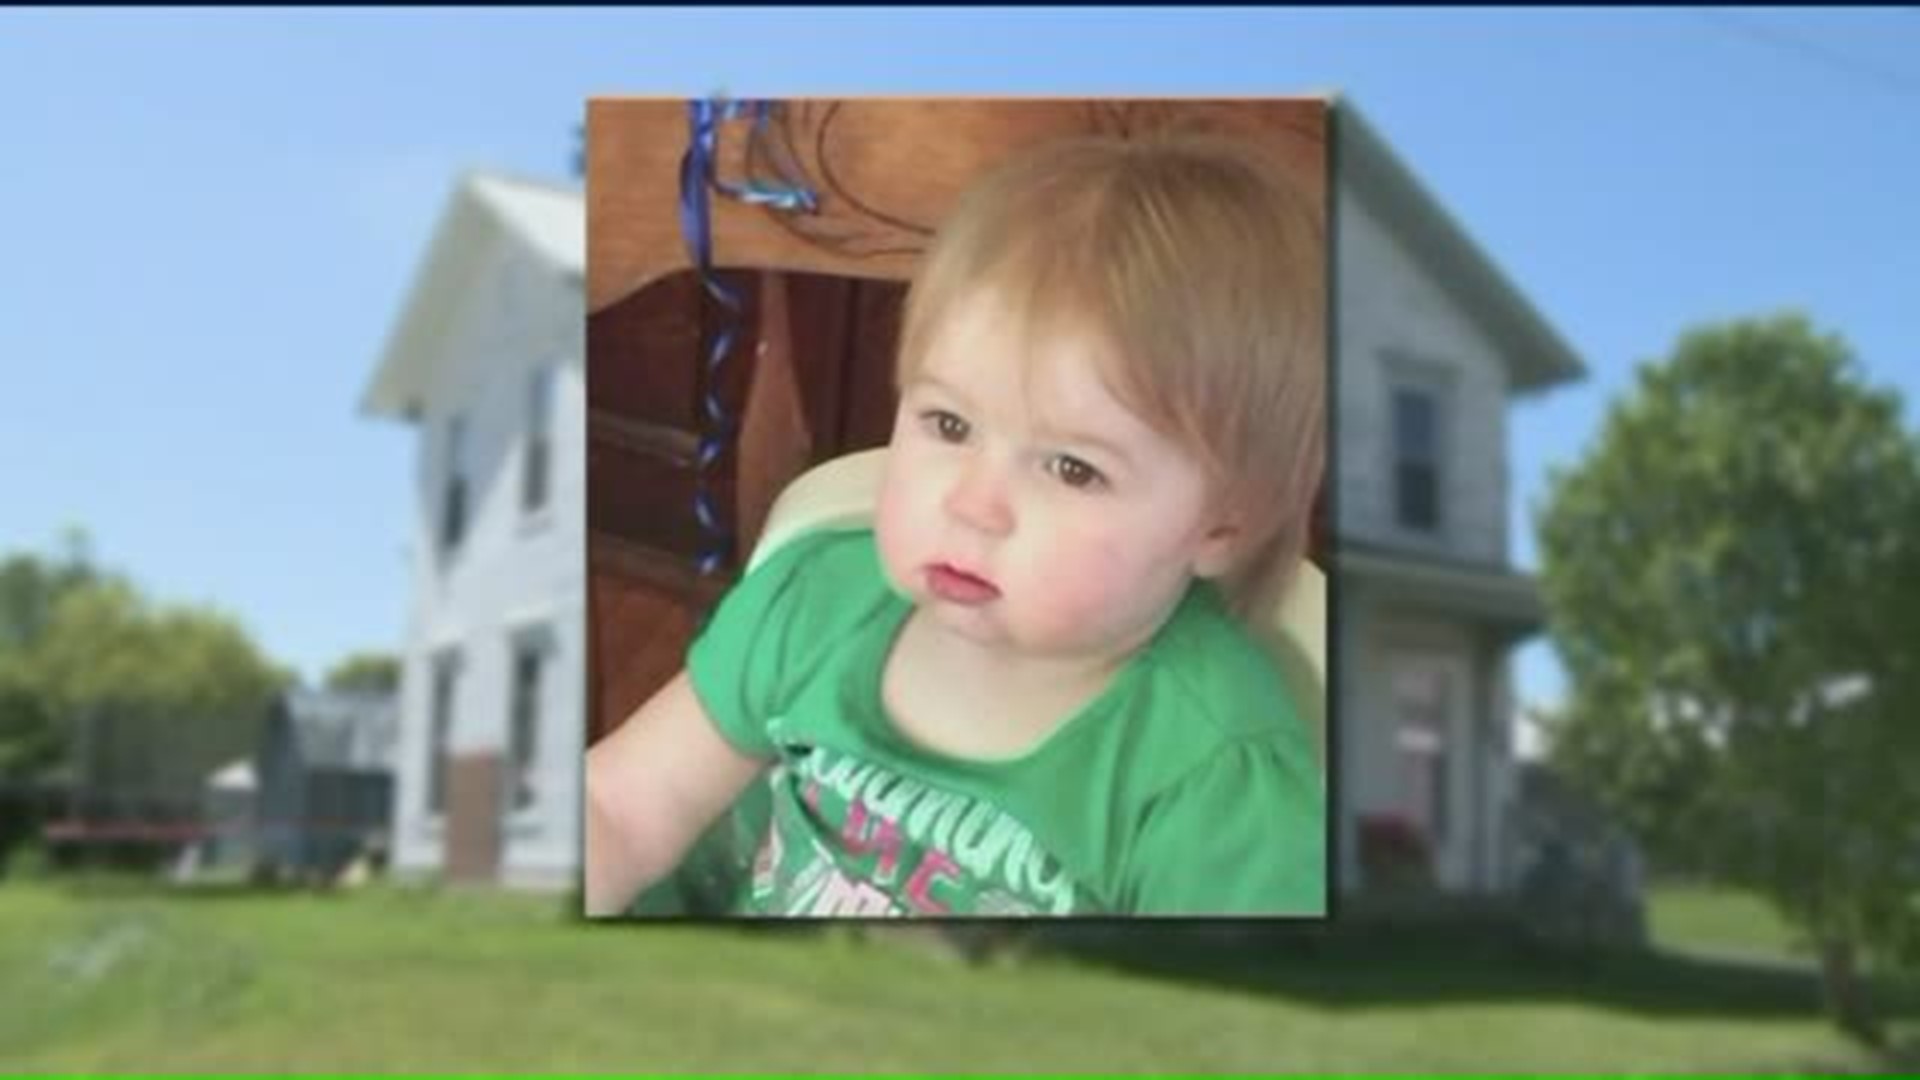 Man Pleads Guilty to Murder in Death of 18-Month-Old Girl